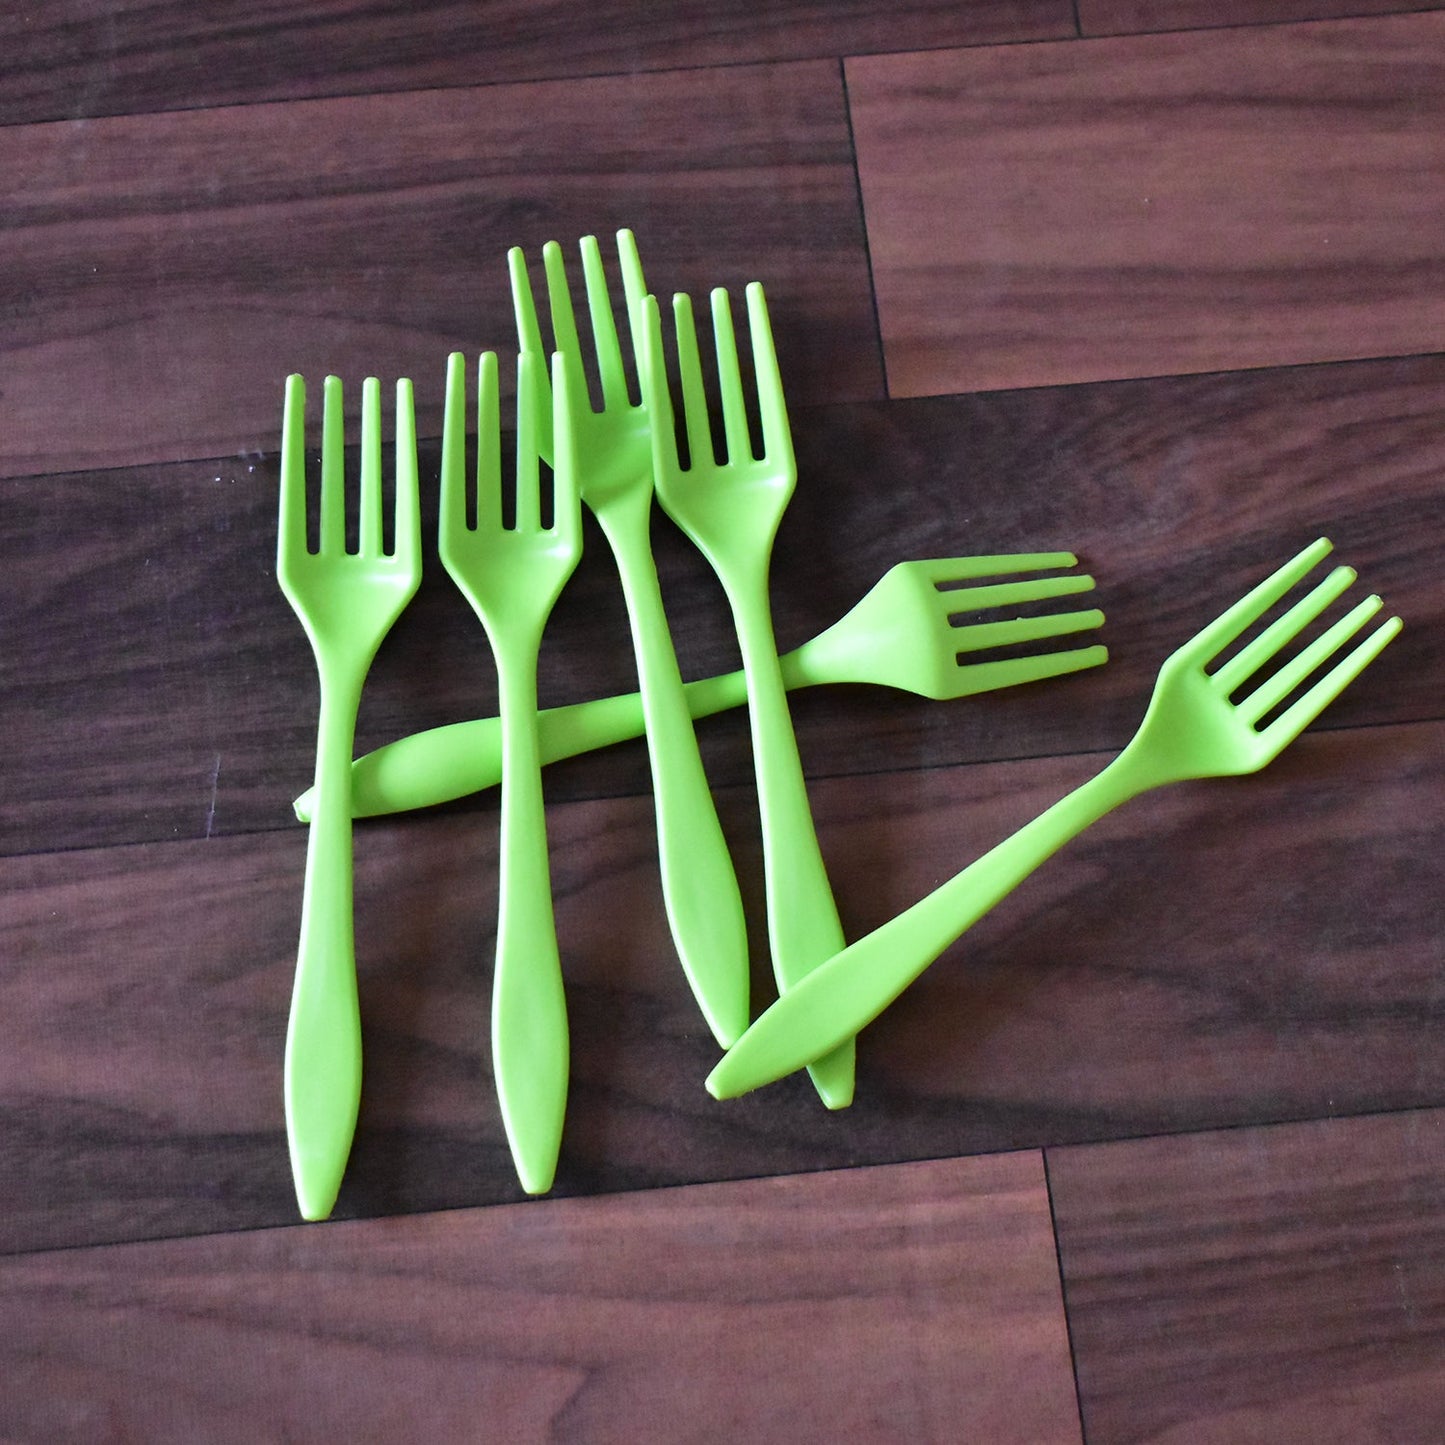 Small plastic 6pc Serving Fork Set for kitchen